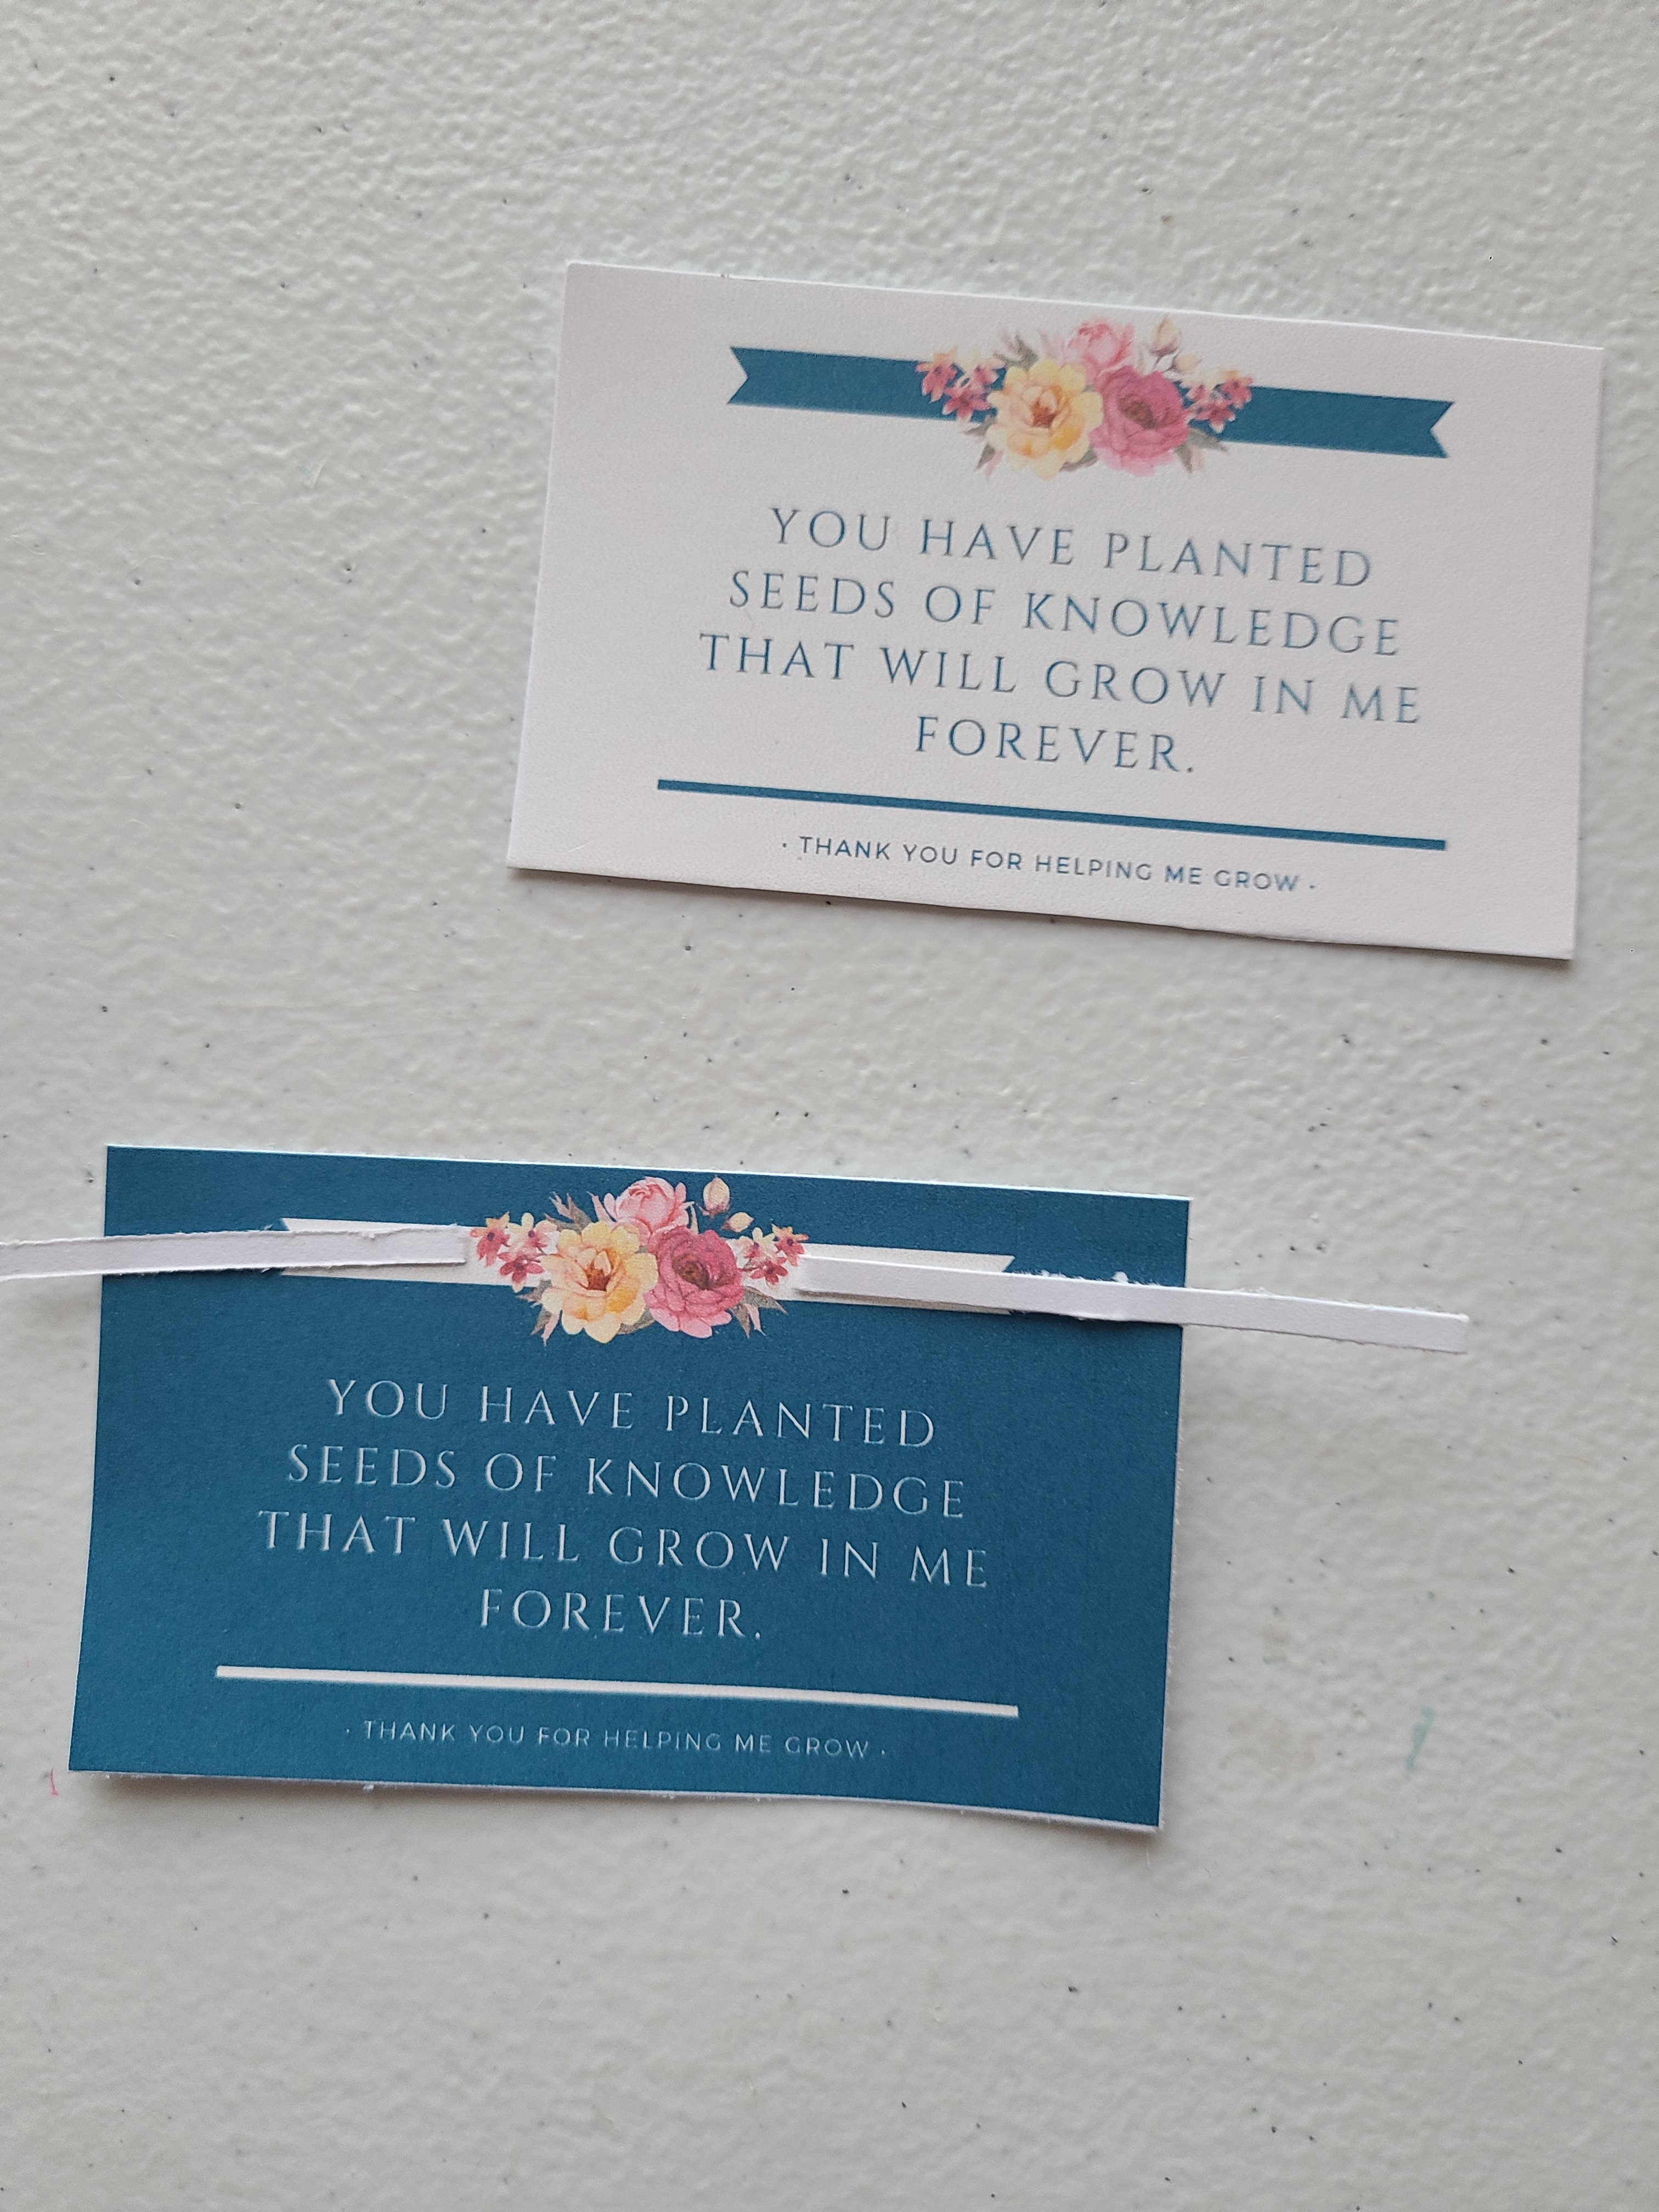 Two printable gift tags to be placed in the end of the year teacher gift which read "You have planted seeds of knowledge that will grow in me forever. Thank you for helping me grow."